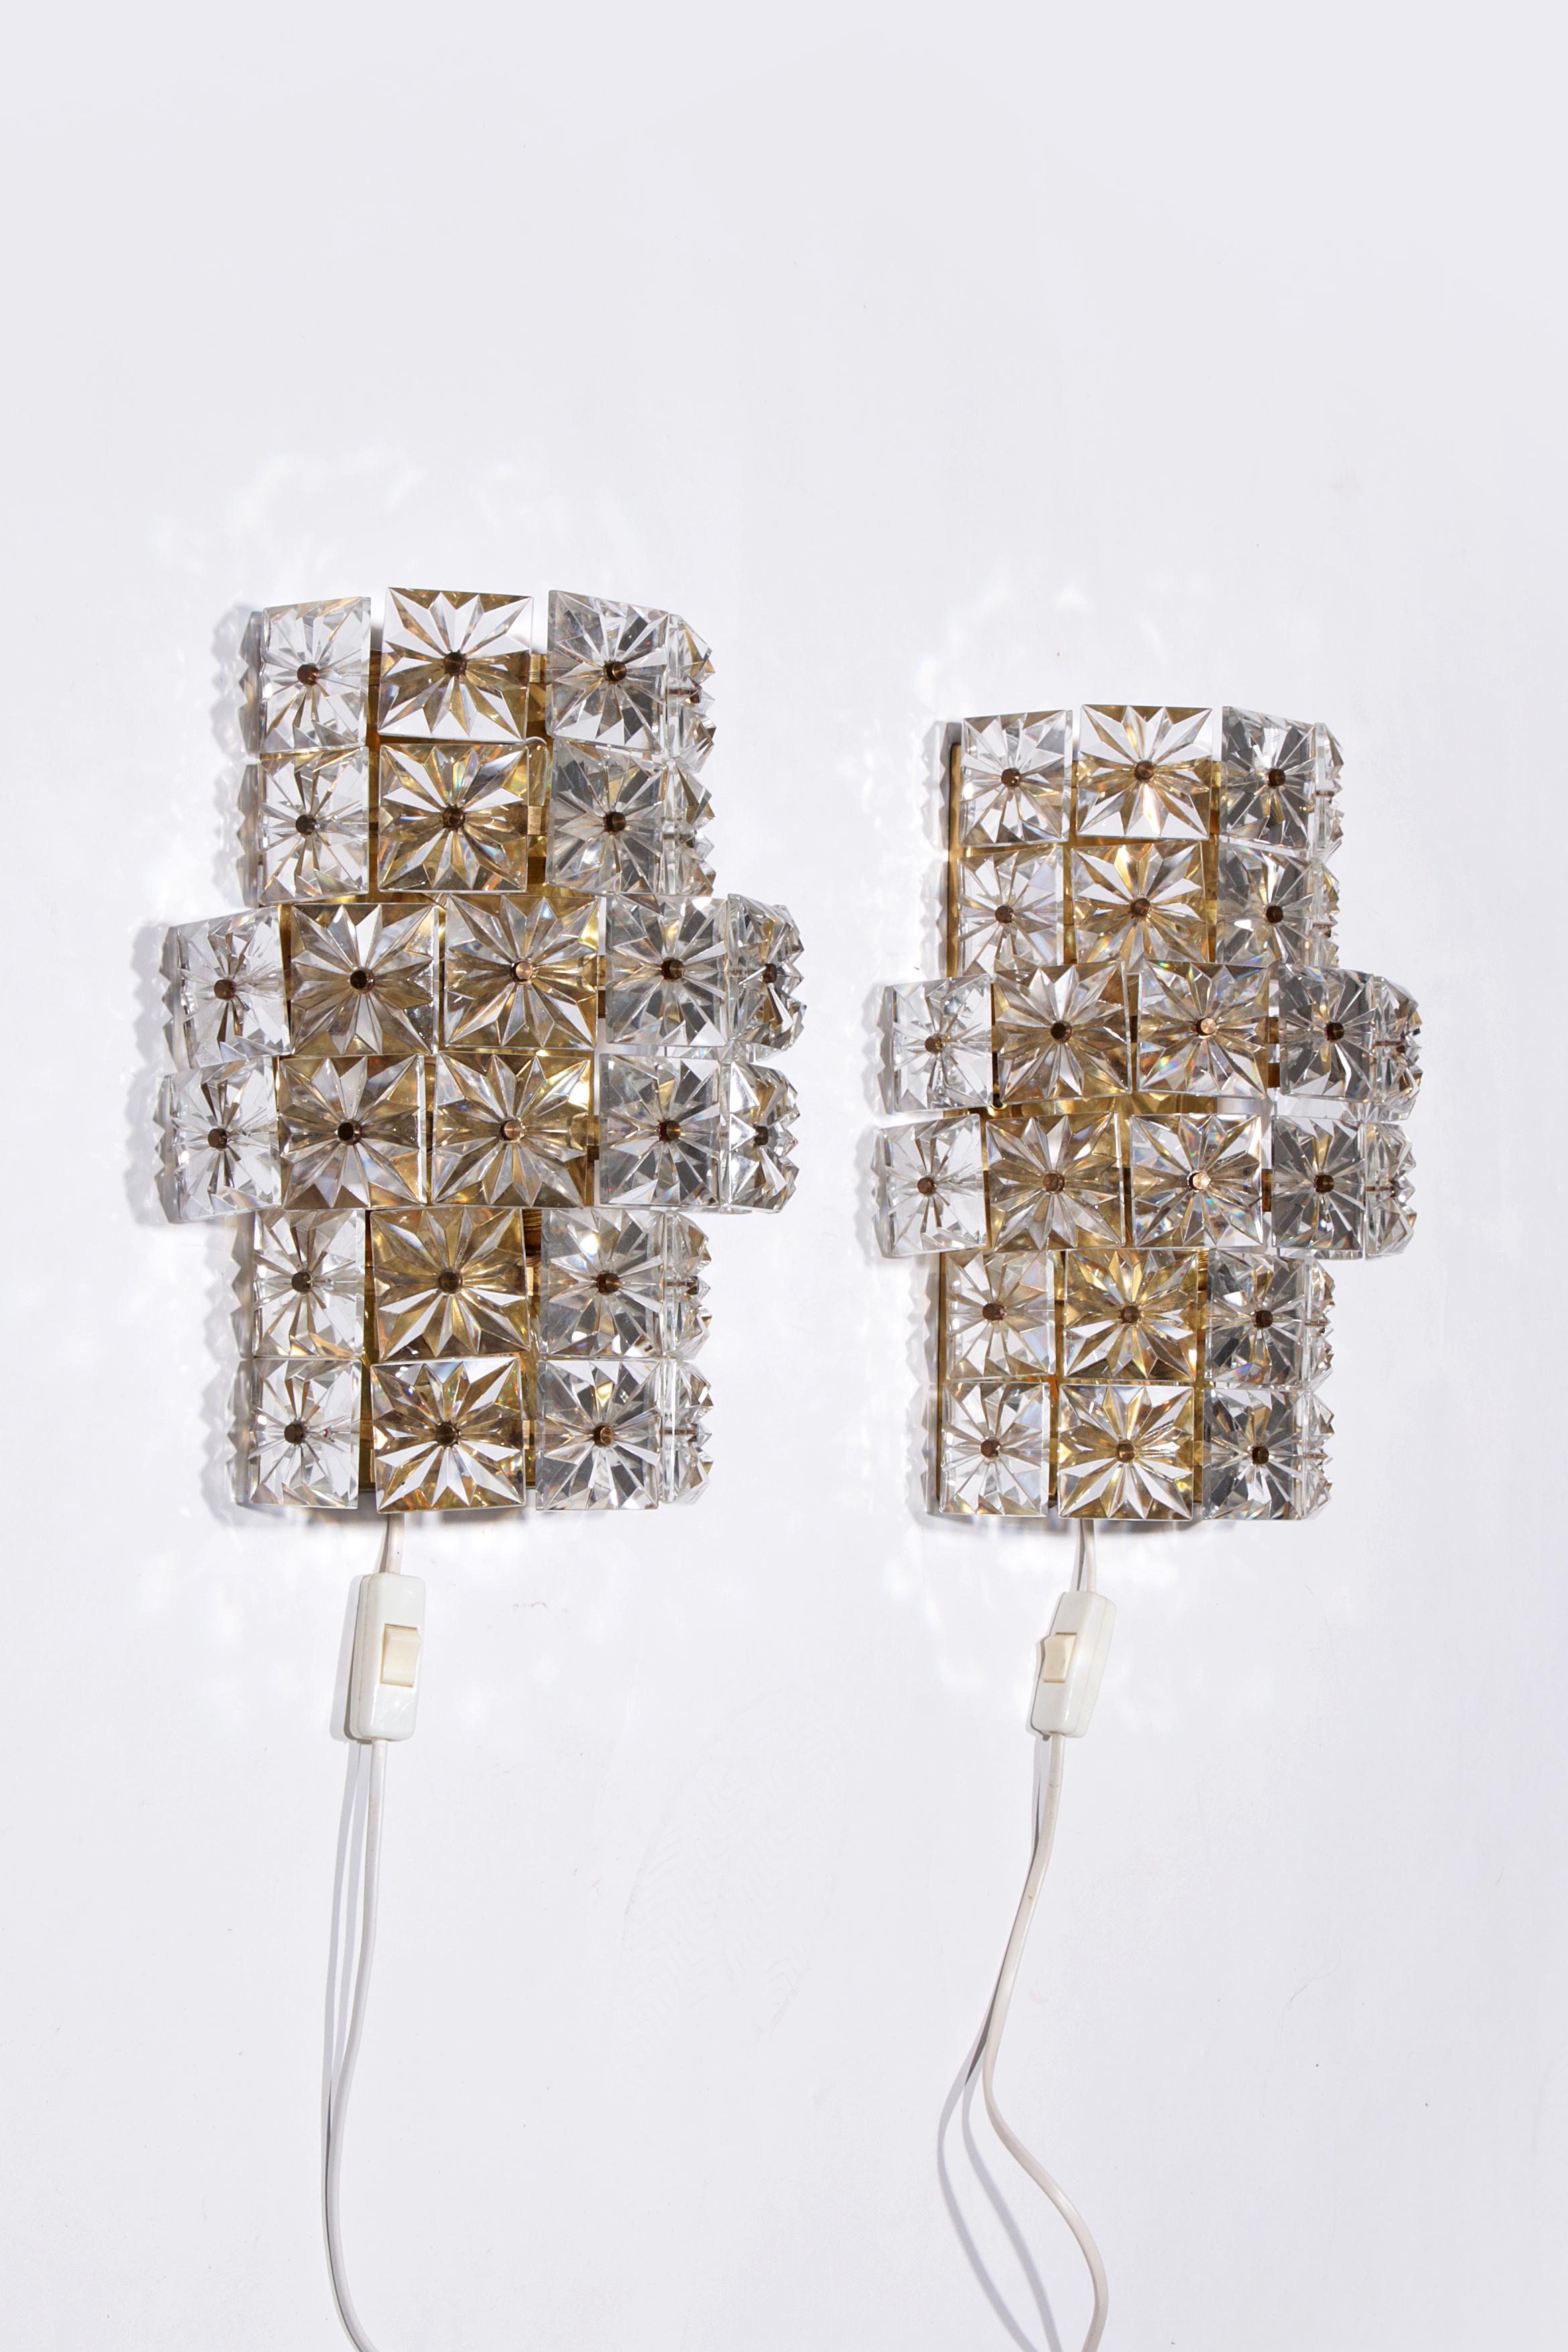 all lamps Scandinavia set of 2, gold-colored with glass plates, 1960

Discover the charm of the 60s with this beautiful set of two Scandinavian wall lamps. These unique lamps are a real eye-catcher in any interior. The combination of a gold-colored